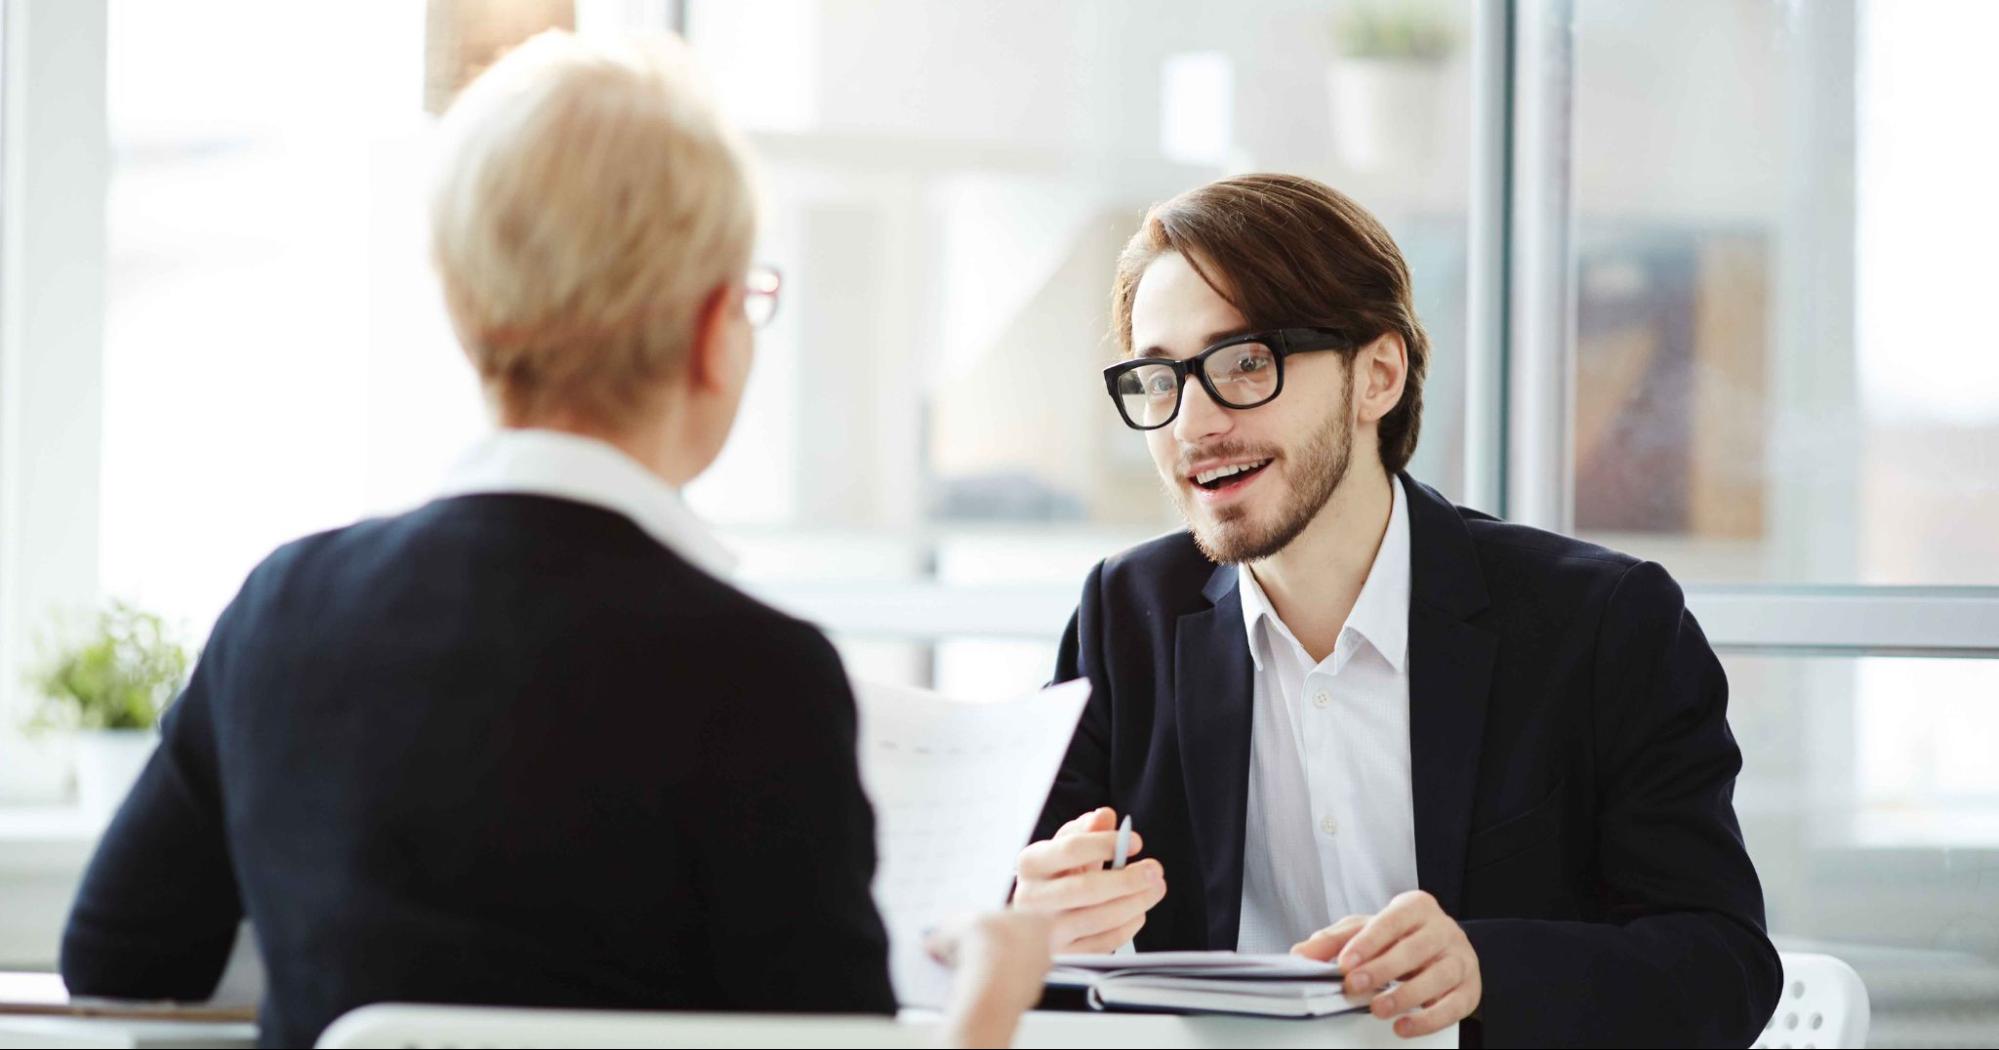 42 Valuable Account Manager Interview Questions You Should be Asking